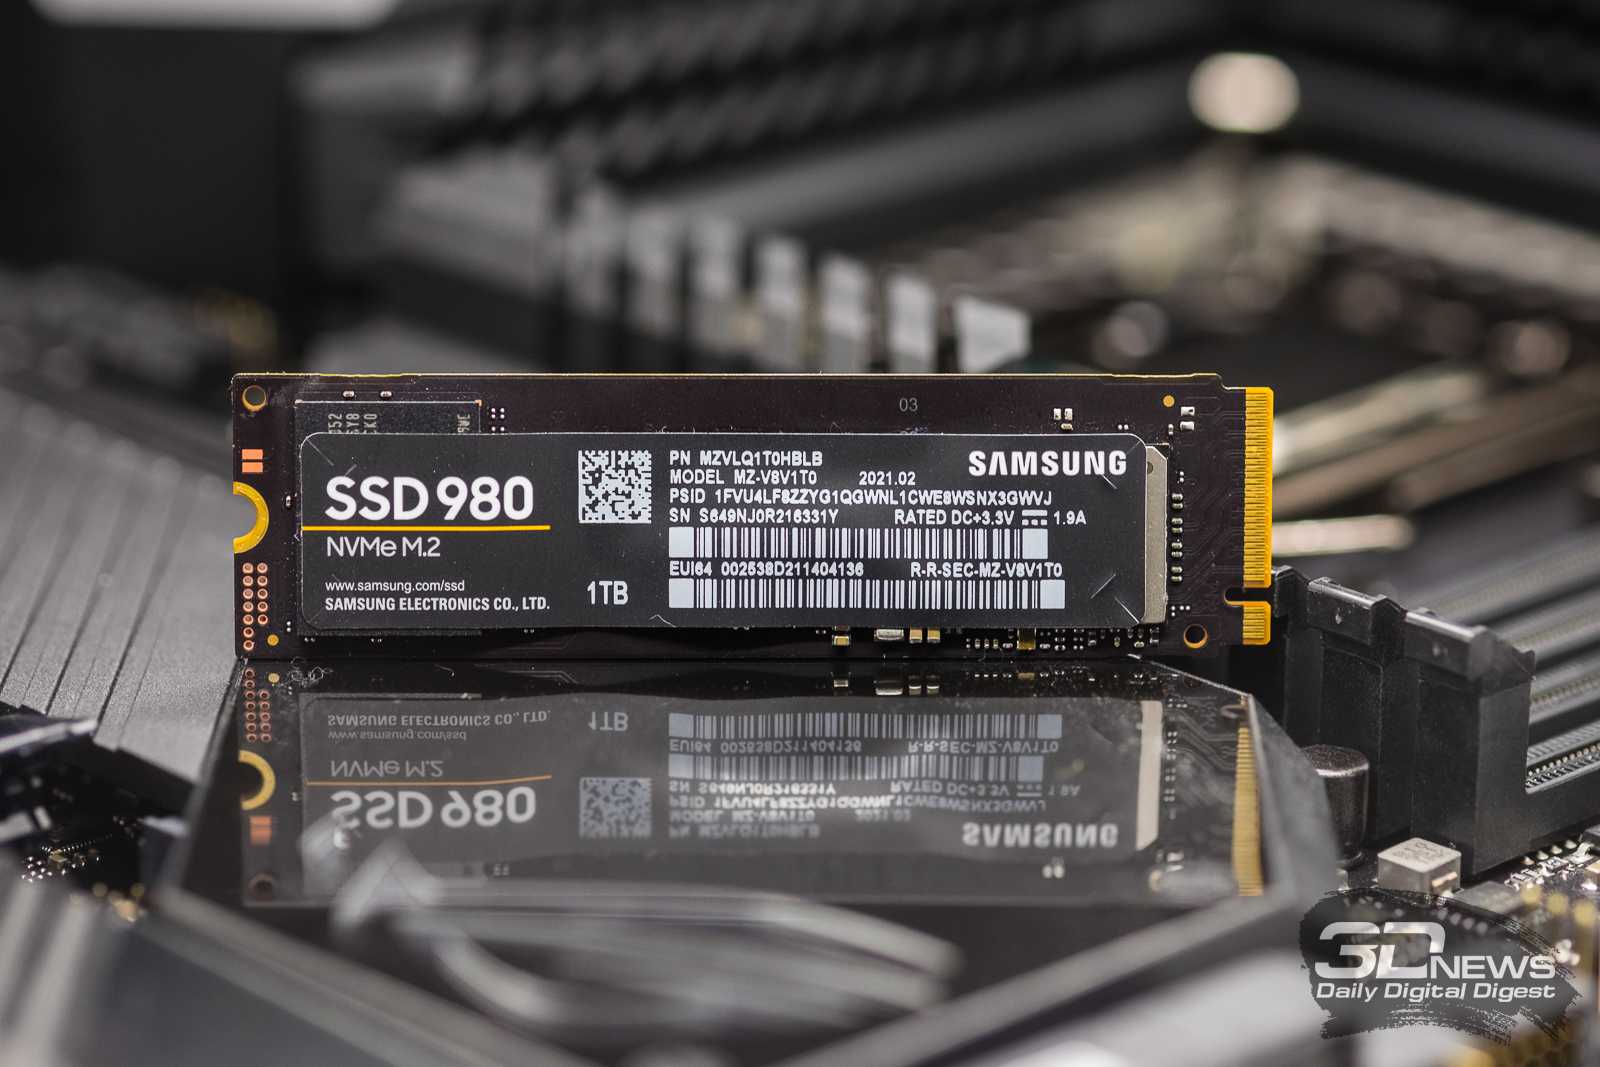 Samsung 980 vs 980 pro: which one should you buy?